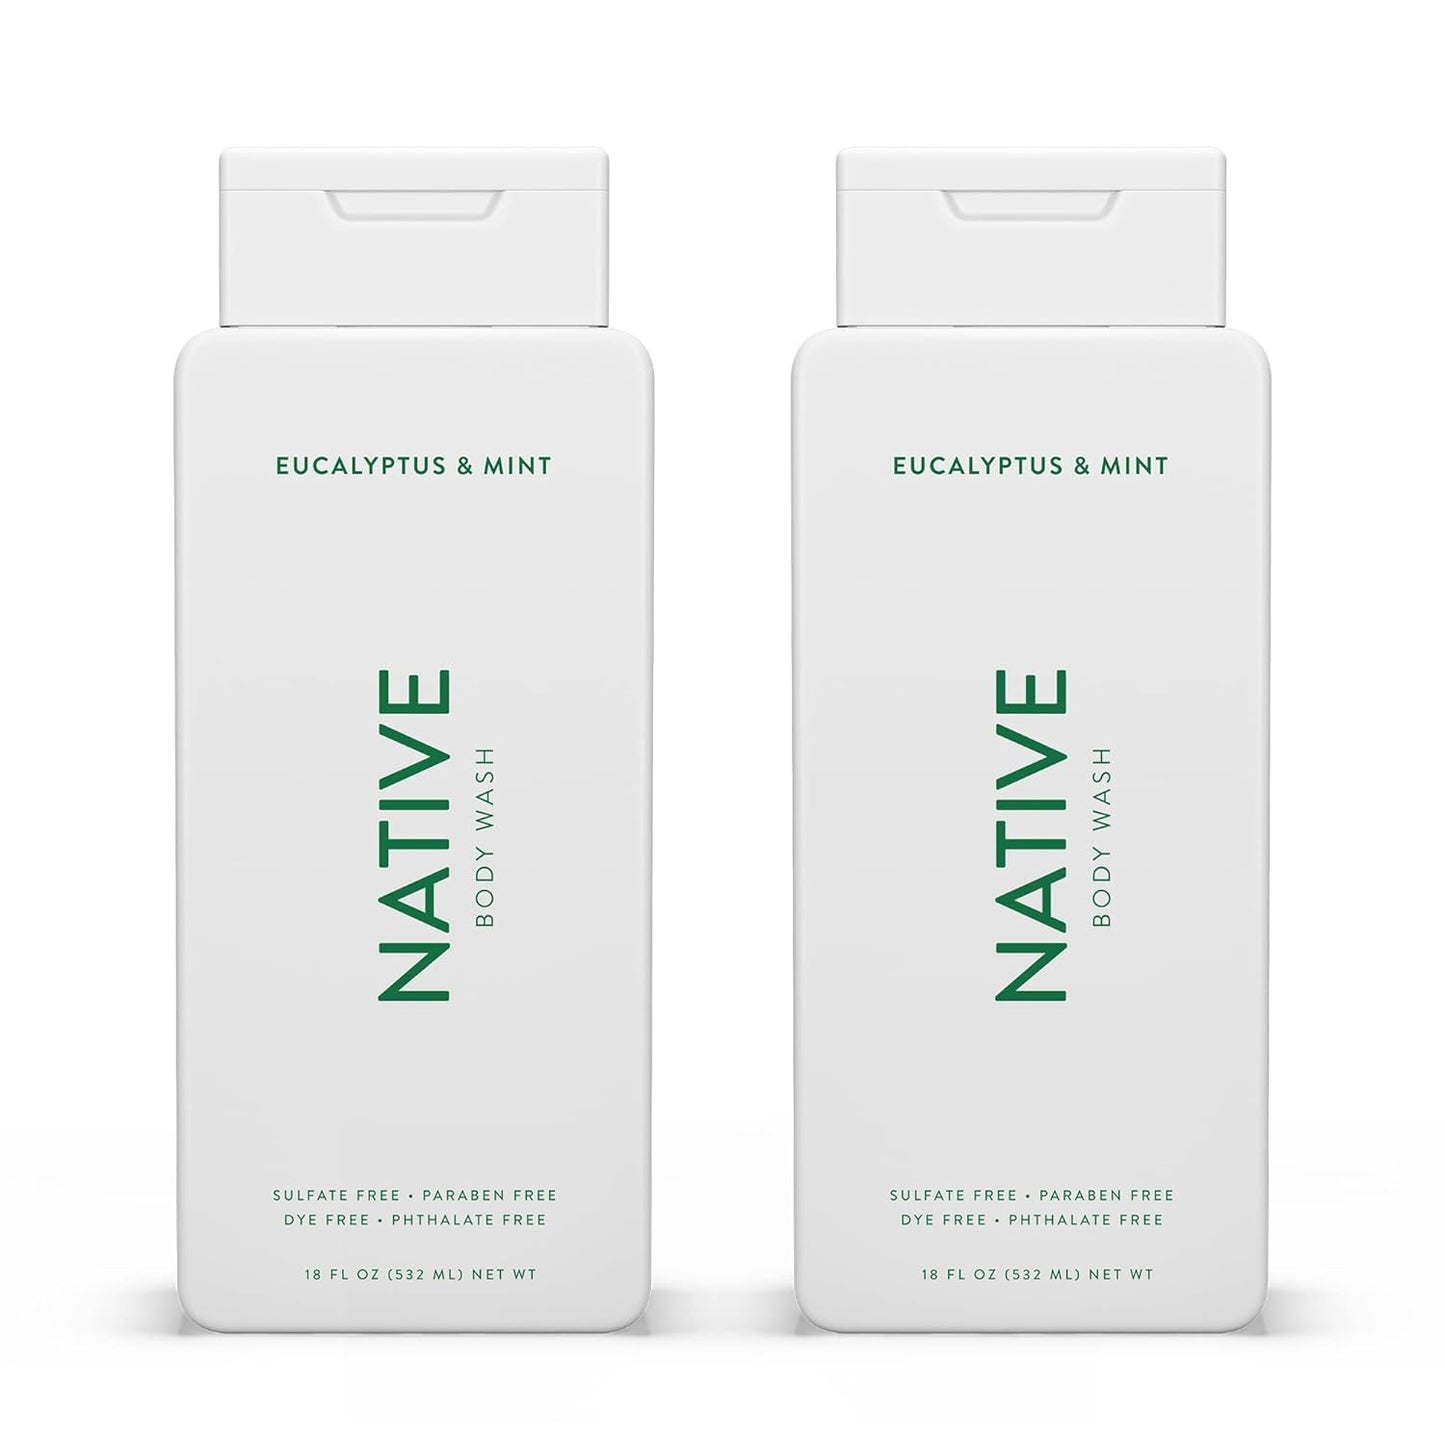 Native Natural Body Wash for Body, Women, Men | Sulfate Free, Paraben Free, Dye Free, with Naturally Derived Clean Ingredients Leaving Skin Soft and Hydrating, Cucumber & Mint 18 oz - 2 Pk